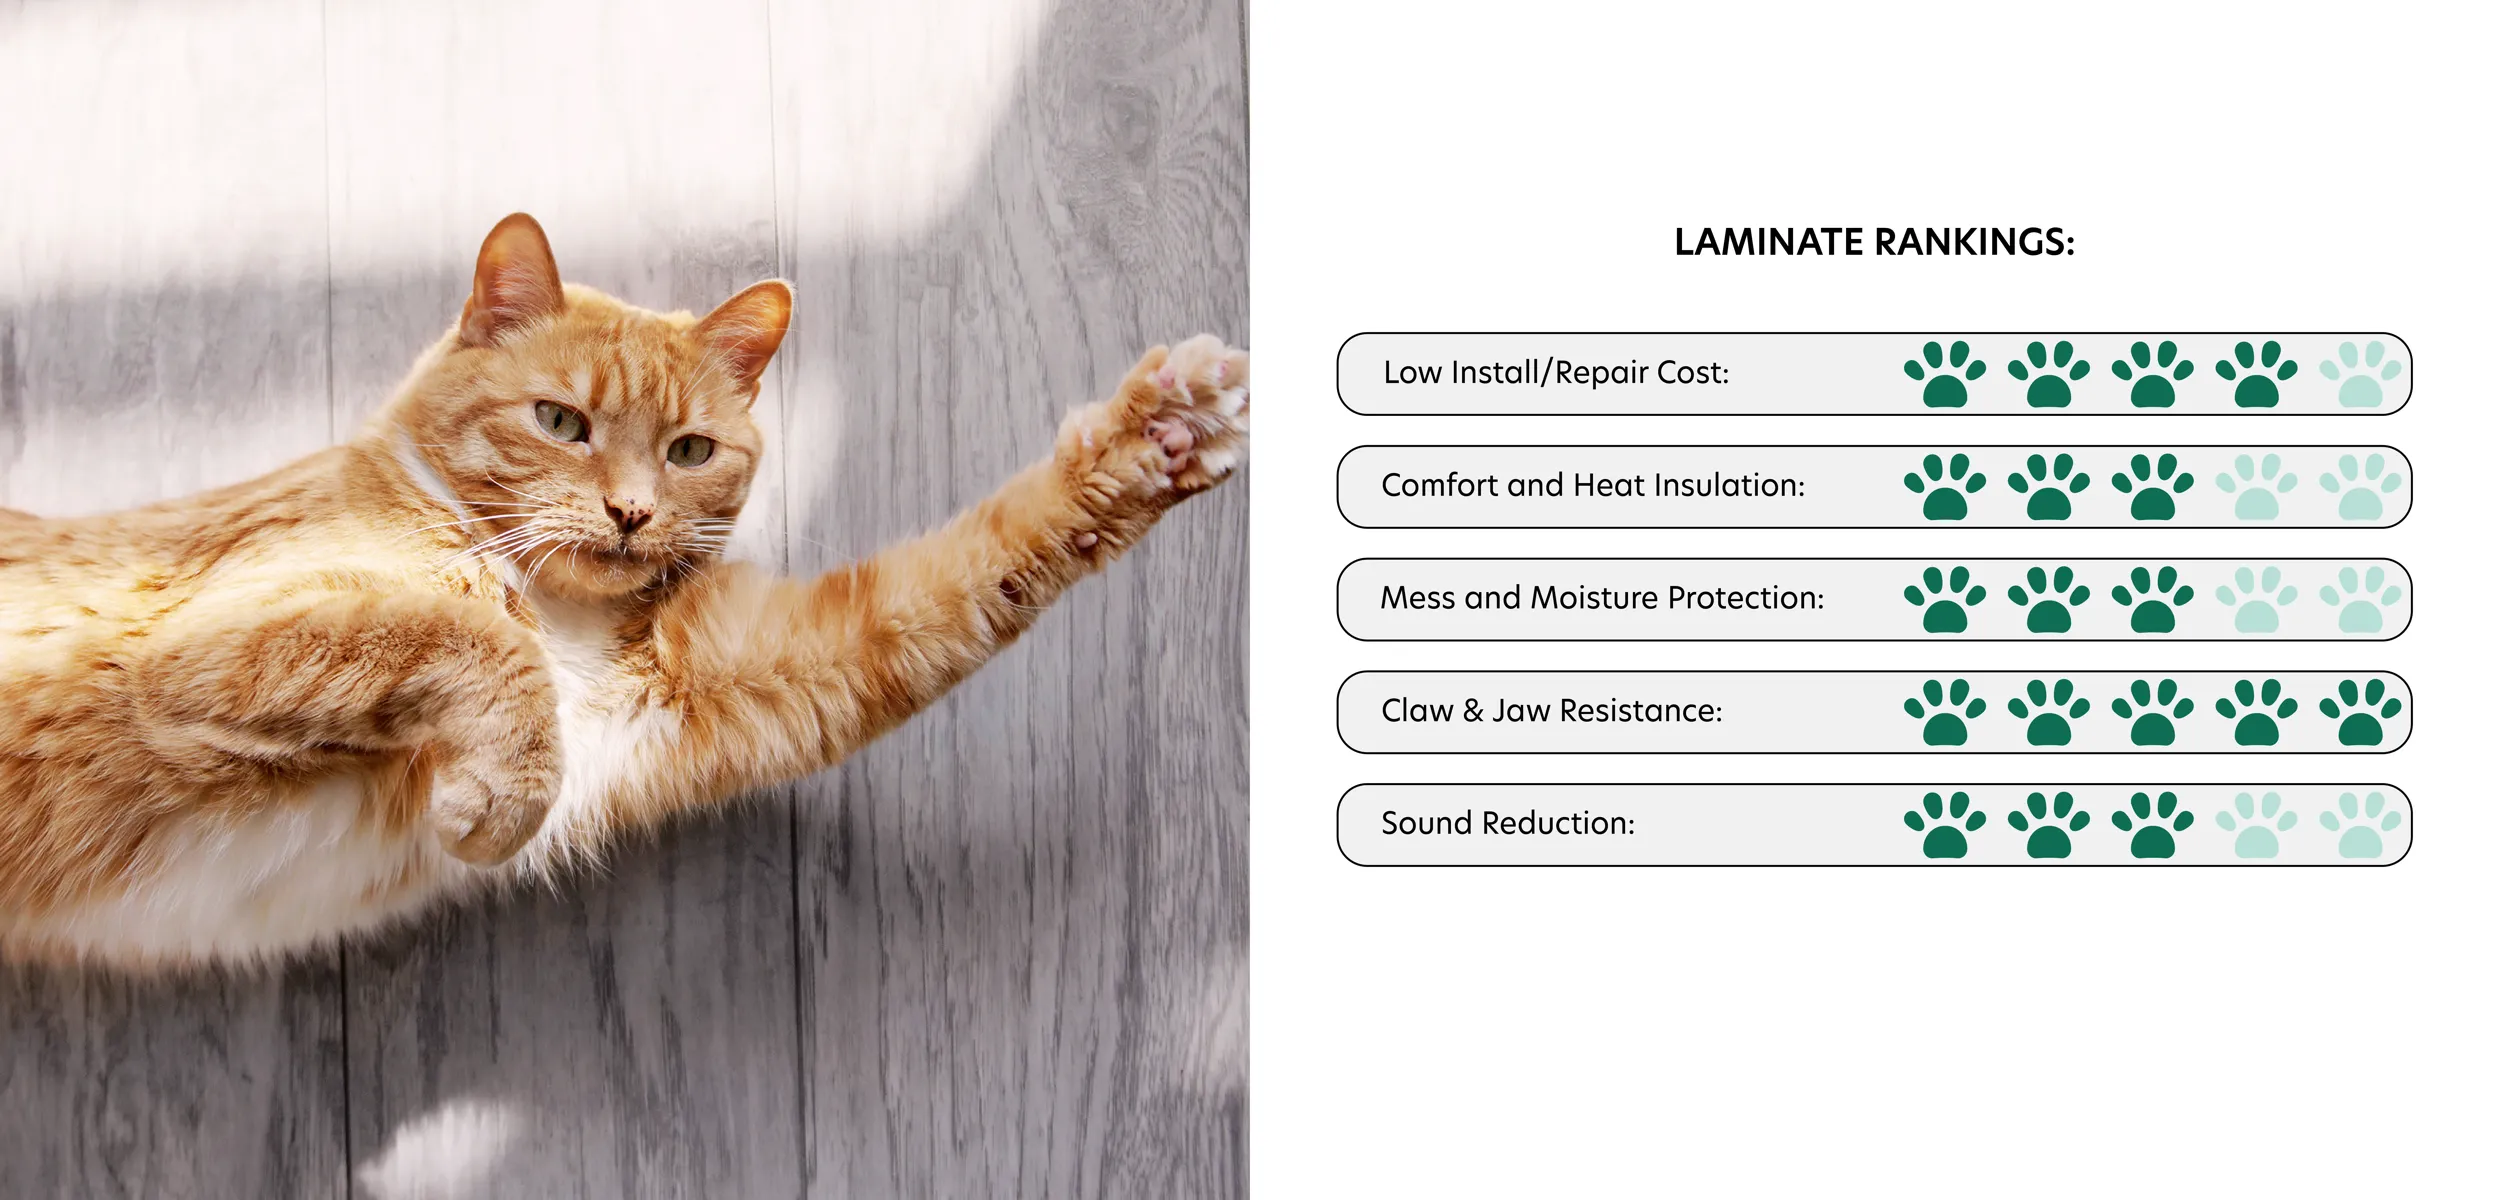 Orange cat stretching out on laminate flooring. Laminate rankings in best flooring for pets. Low Install/Repair Cost: 4 Paws. Comfort and Heat Insulation: 3 Paws. Mess and Moisture Protection: 3 Paws. Claw & Jaw Resistance: 5 Paws. Sound Reduction: 3 Paws.